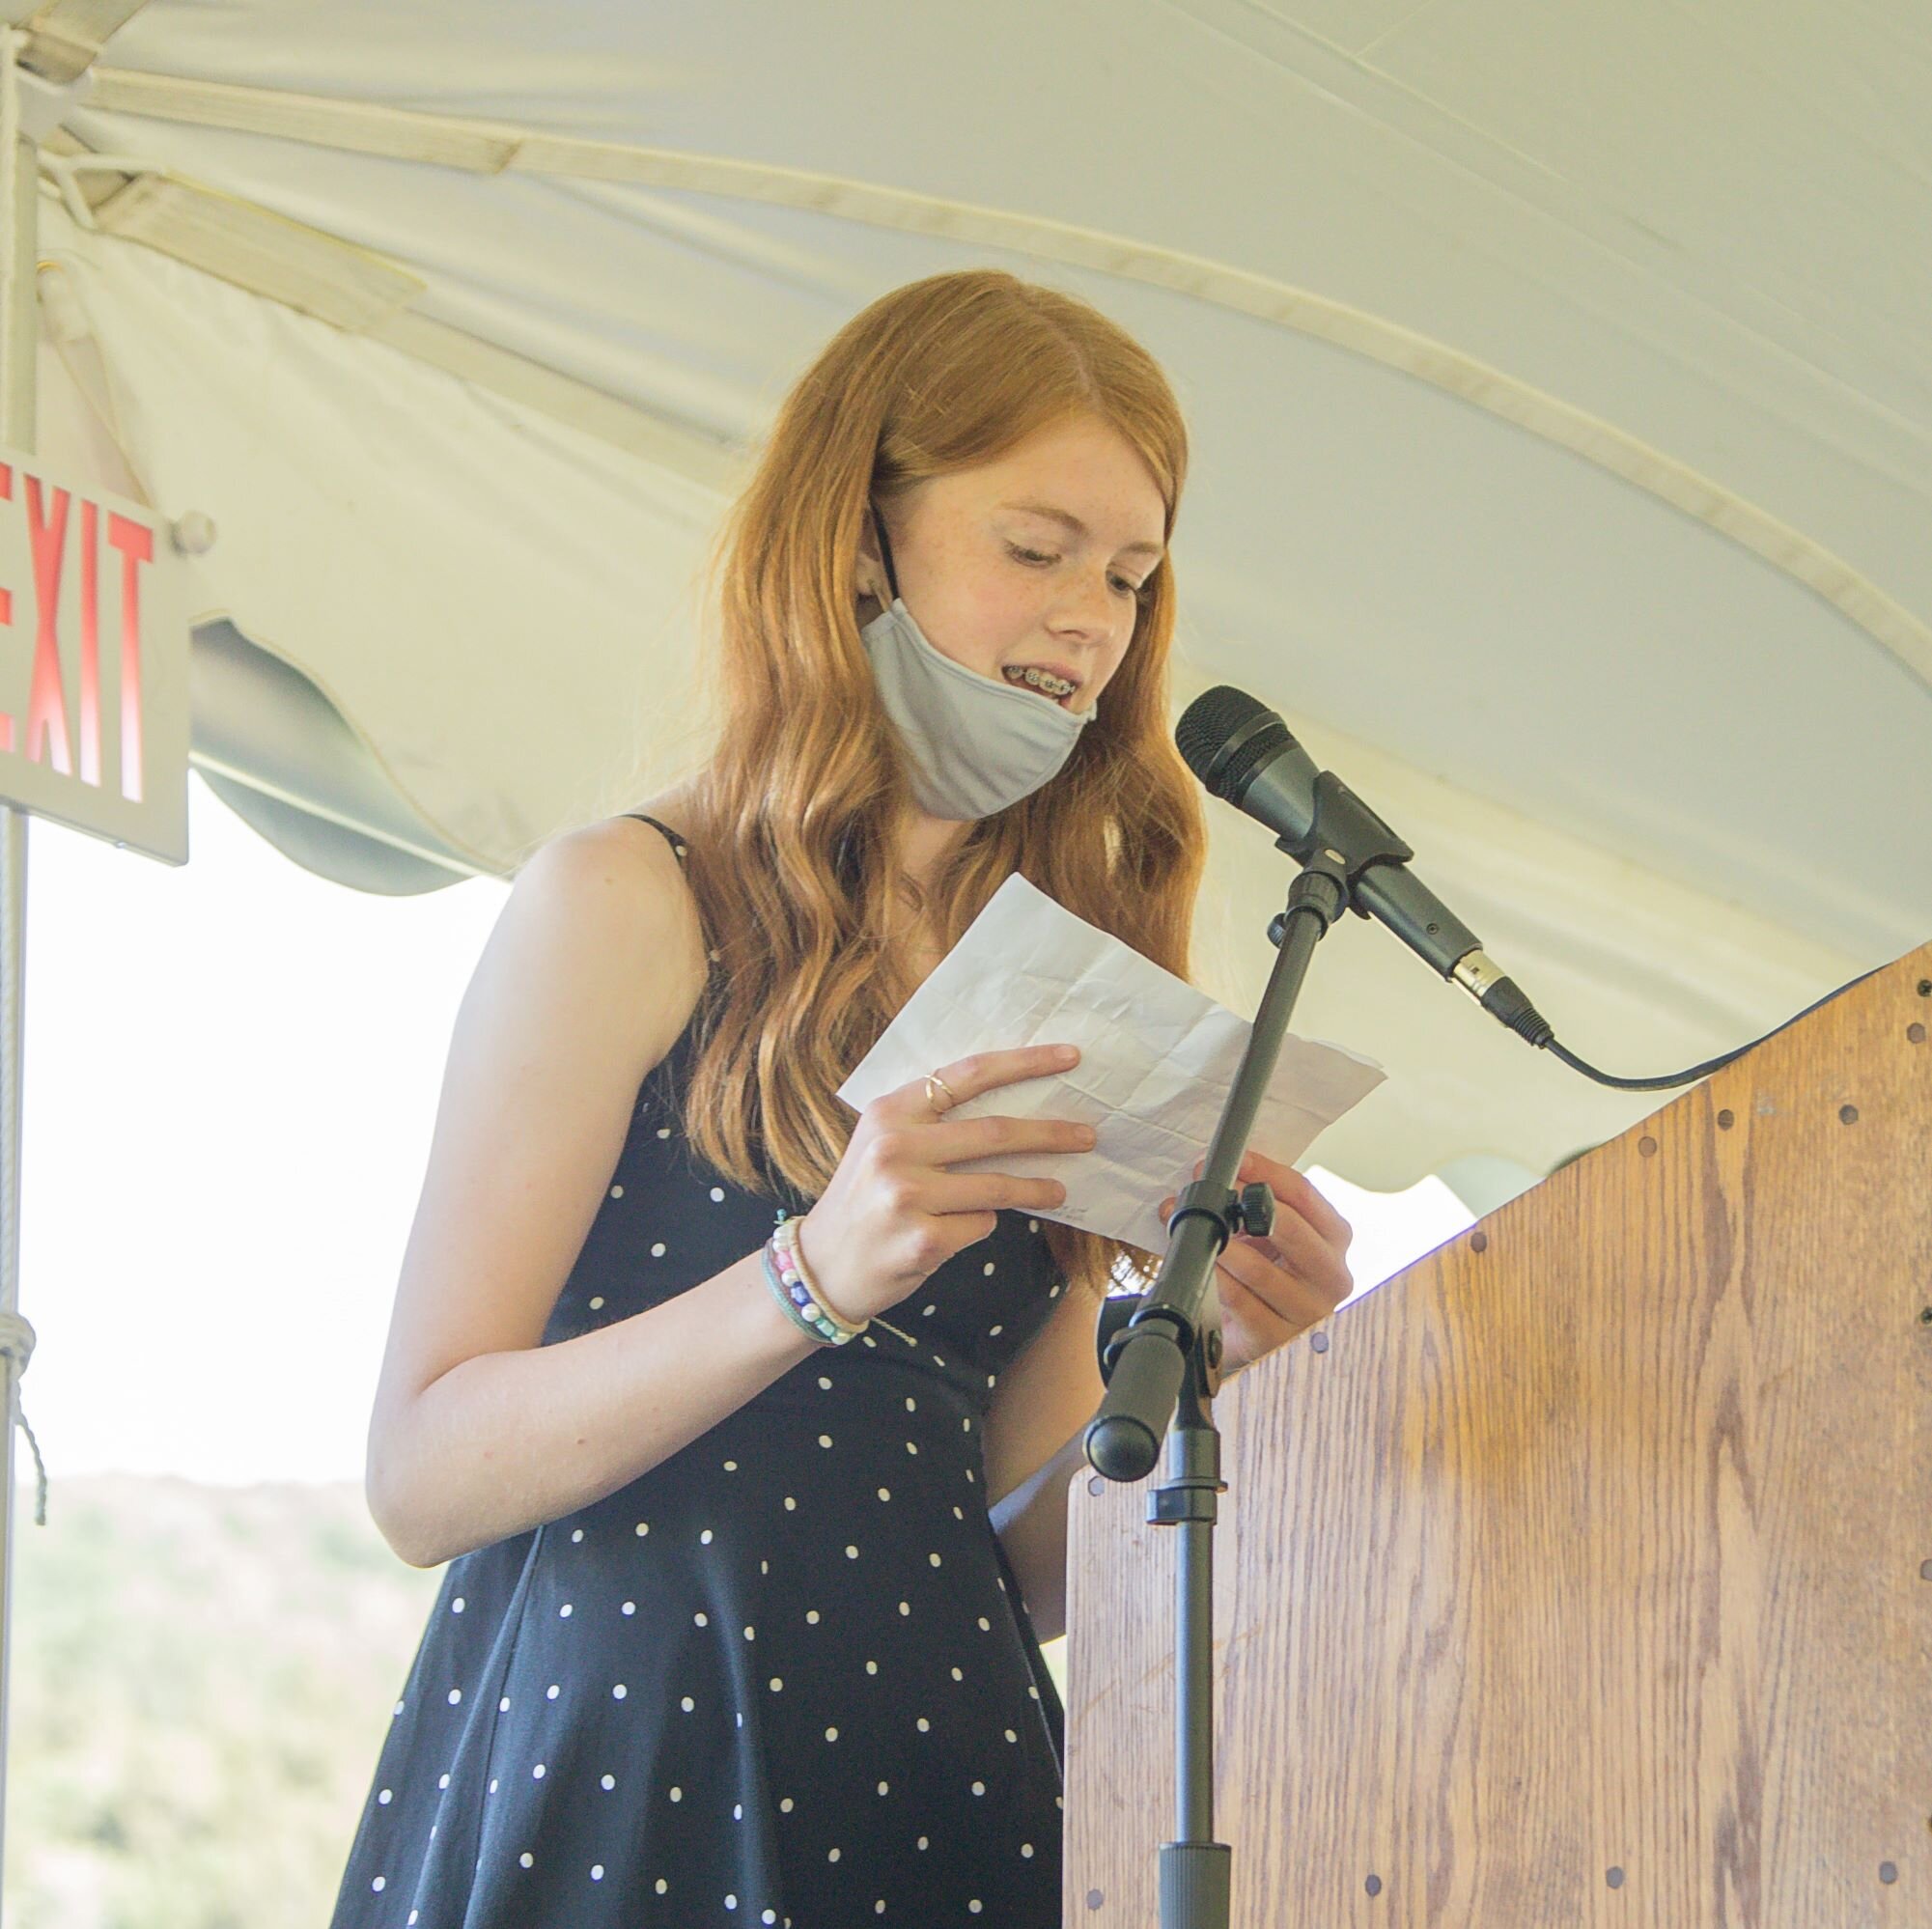   Adleigh Franke delivers the land acknowledgement recognizing that the school sits on ground once part of the Abenaki Nation. Photo by Michaela Milligan.  